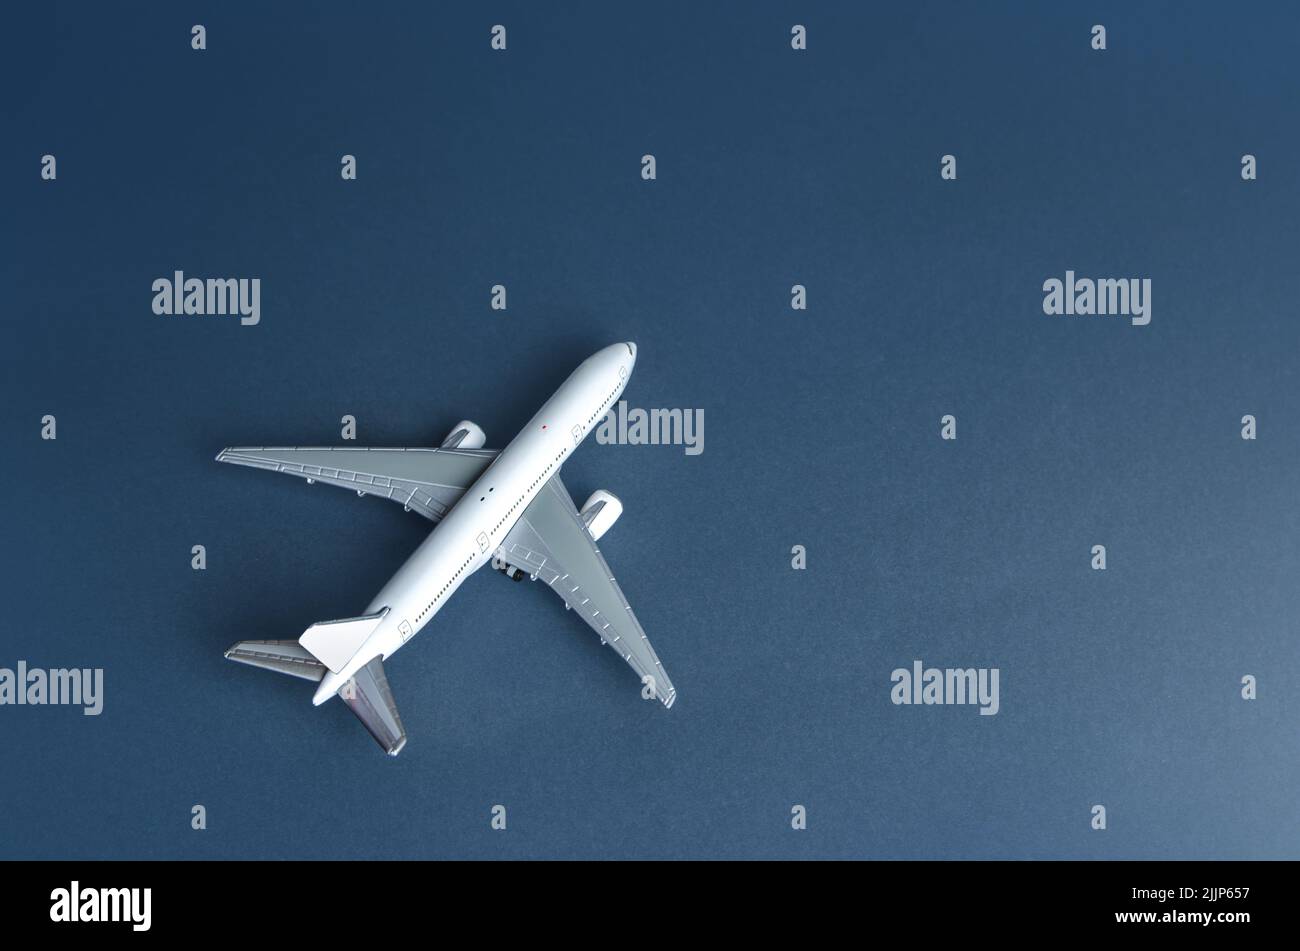 White plane. Cargo or passenger airliner. Business and tourism. Airline operators, air carriers. World communication and commercial flights. Travel. L Stock Photo